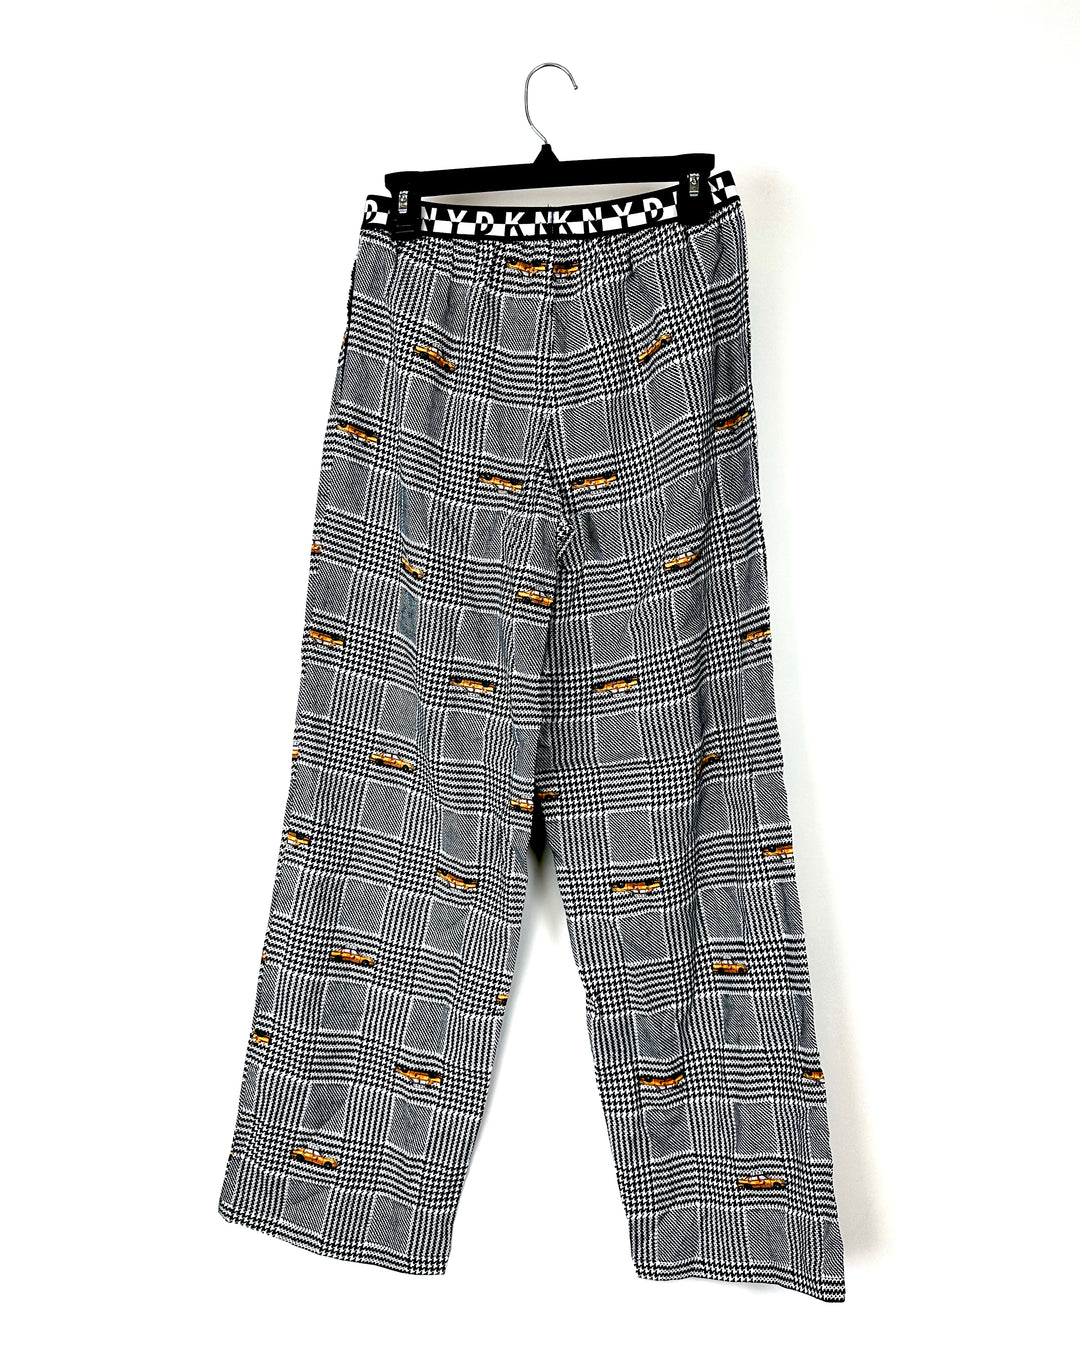 Taxi Houndstooth Pajamas Bottoms - Small